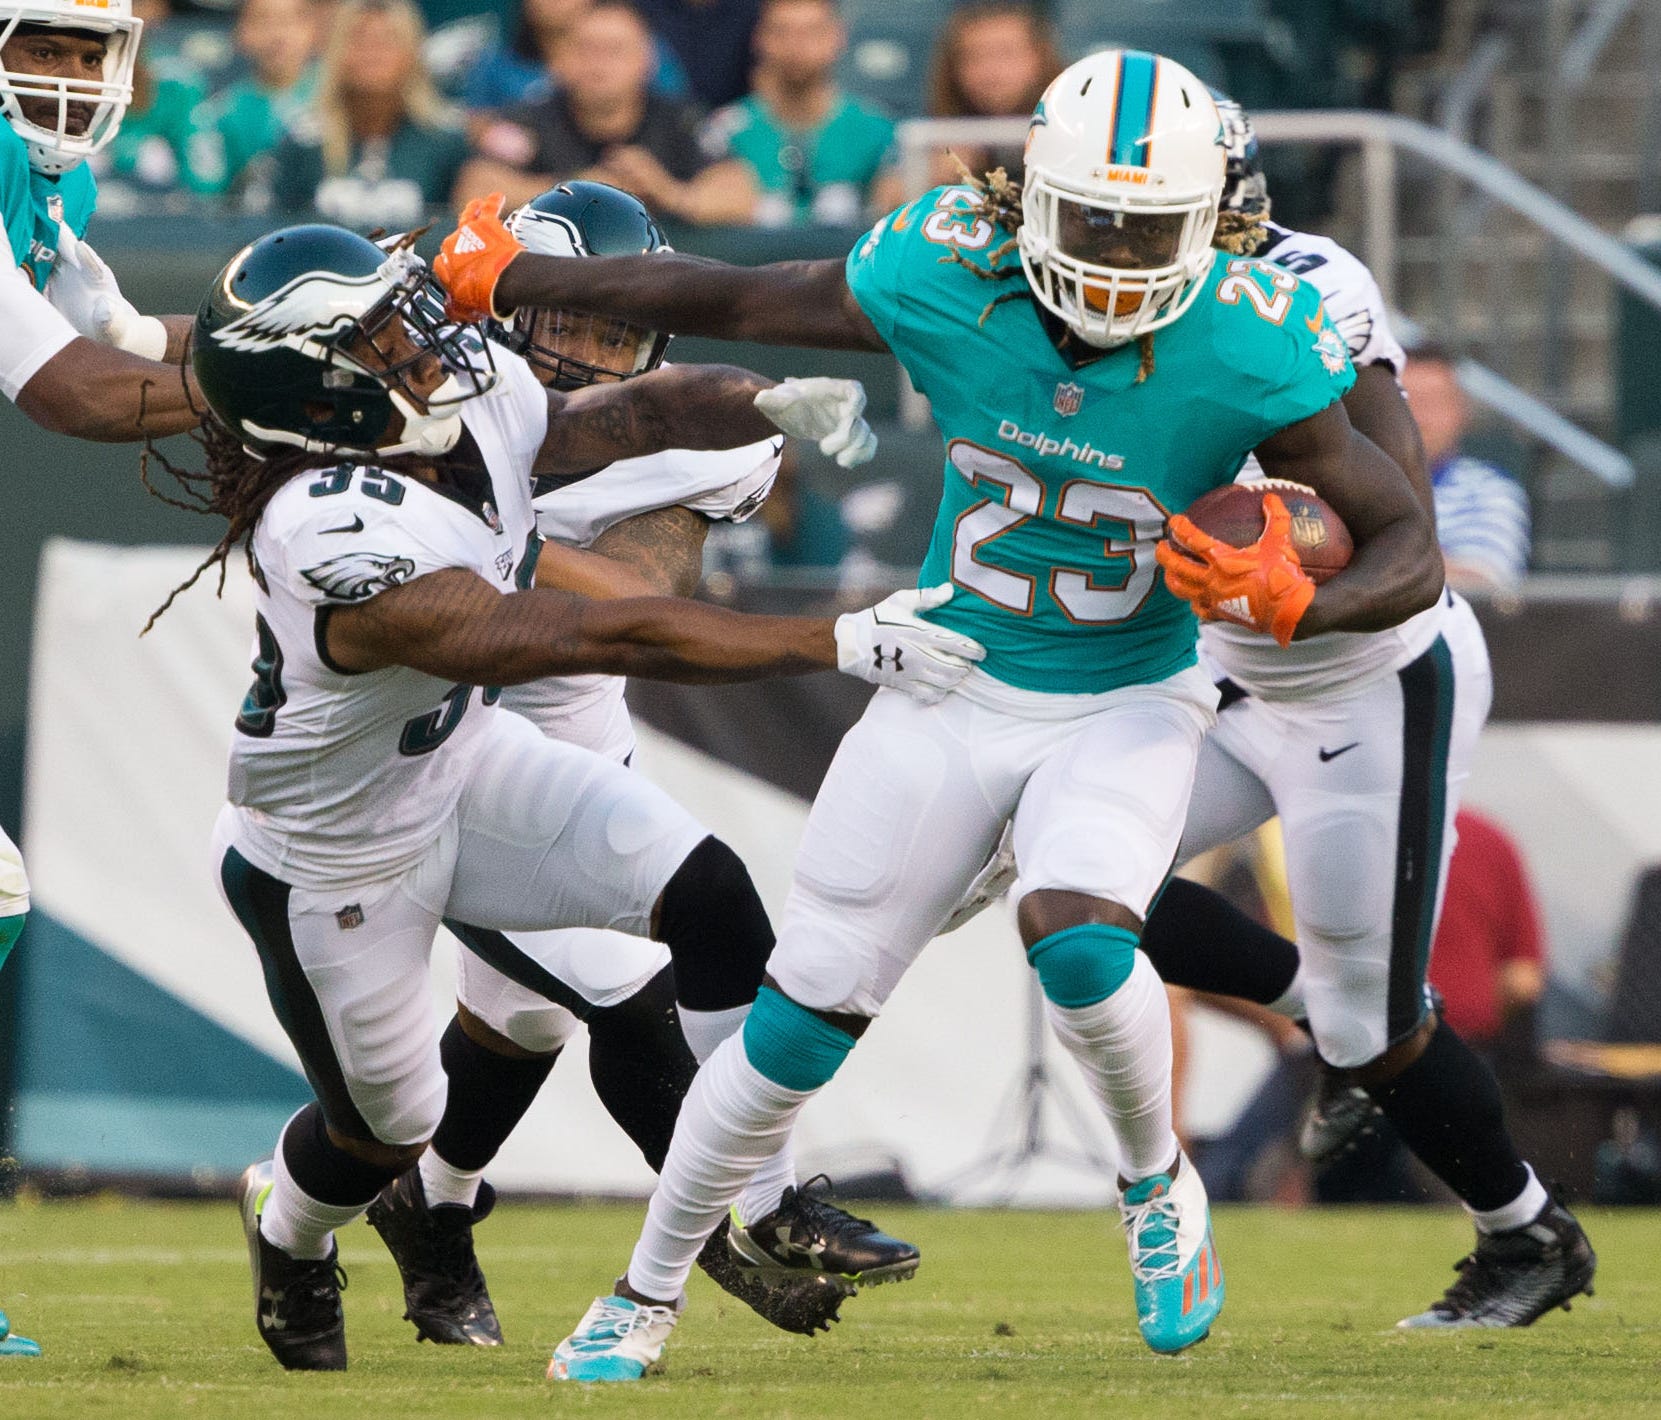 Miami Dolphins running back Jay Ajayi (23) breaks the tackle attempt of Philadelphia Eagles cornerback Ronald Darby (35) during the first quarter at Lincoln Financial Field.